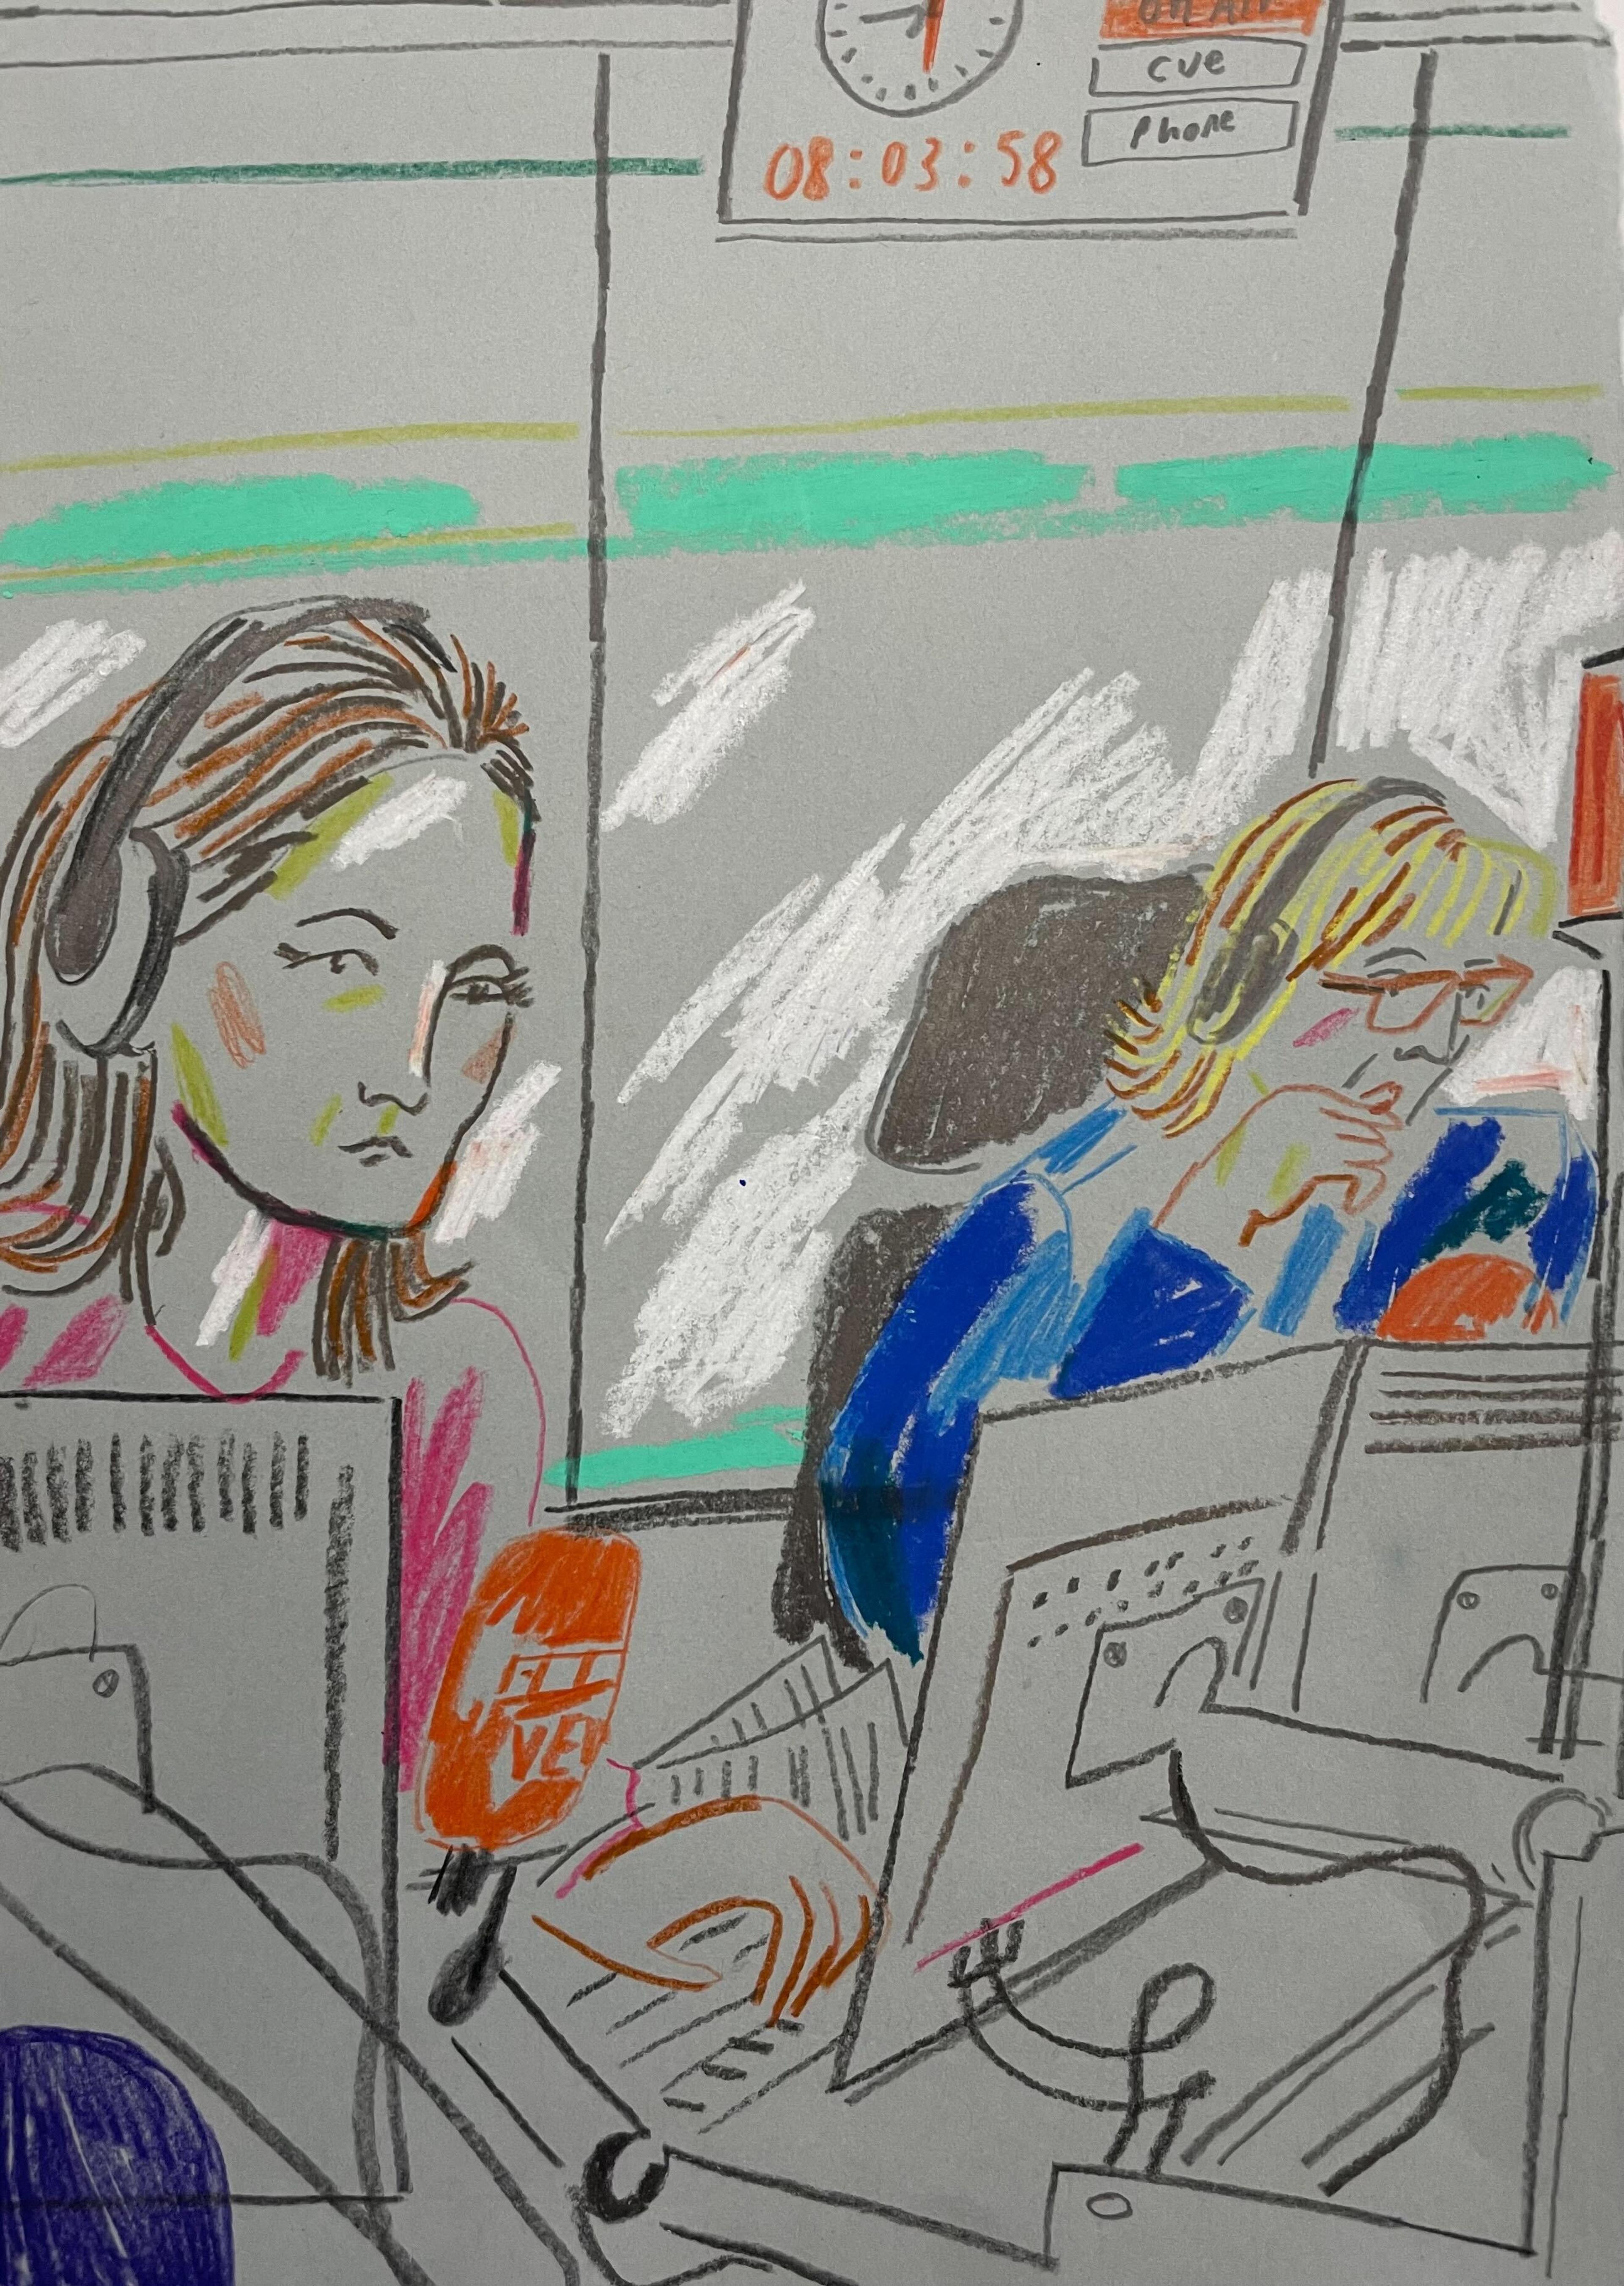 Illustration of two people, they are wearing headphones and are sitting at a desk with monitors in front of them.